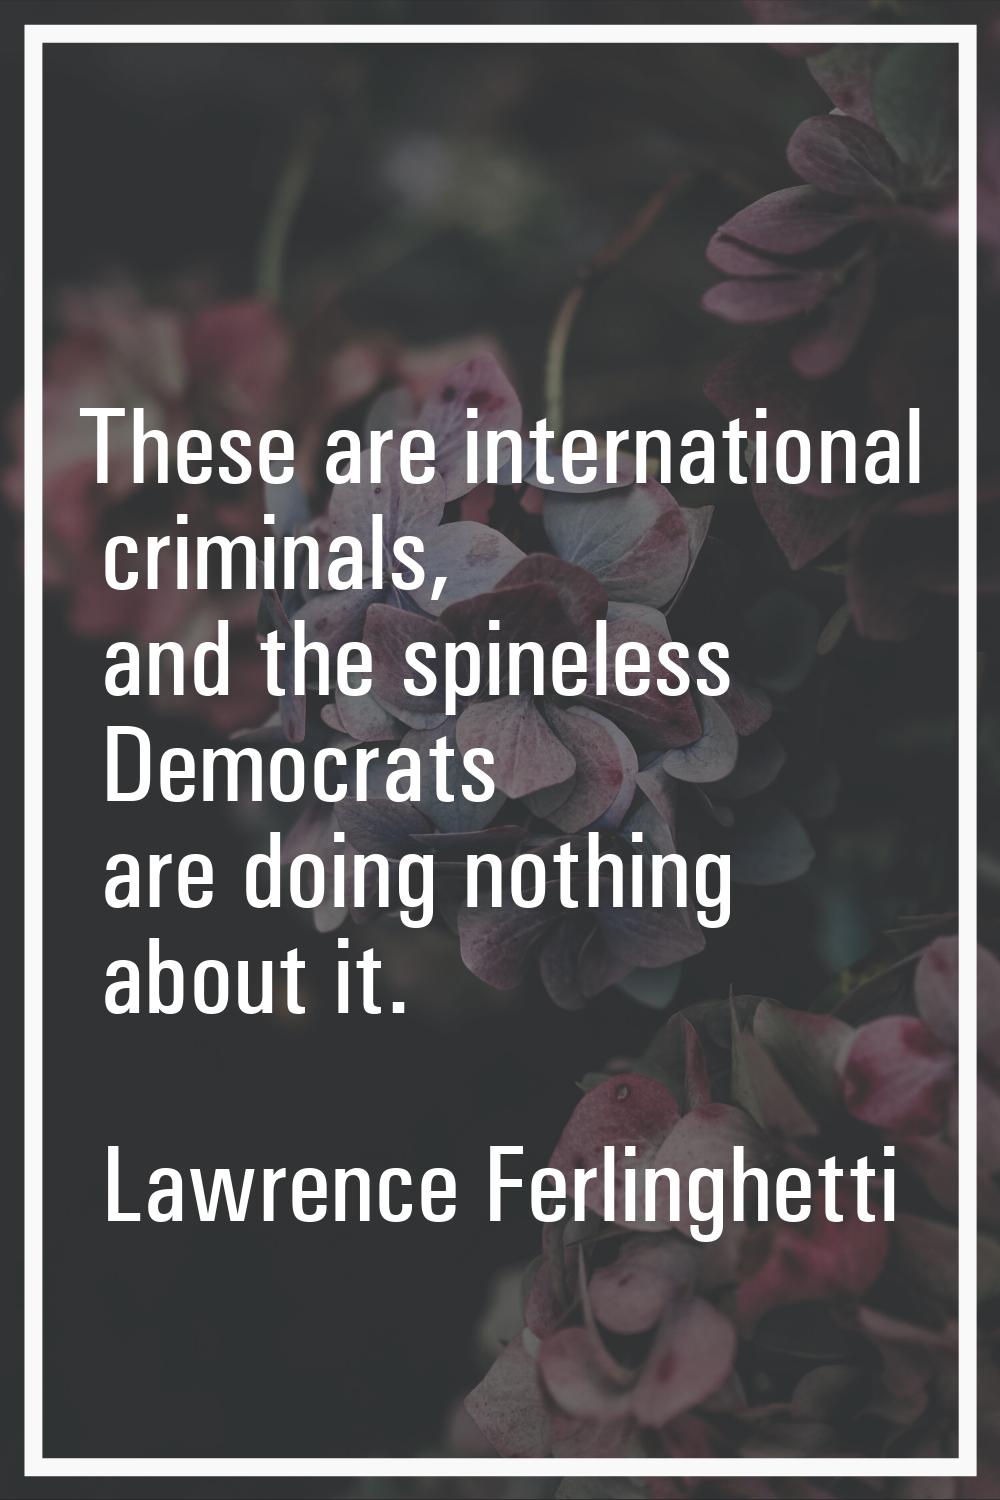 These are international criminals, and the spineless Democrats are doing nothing about it.